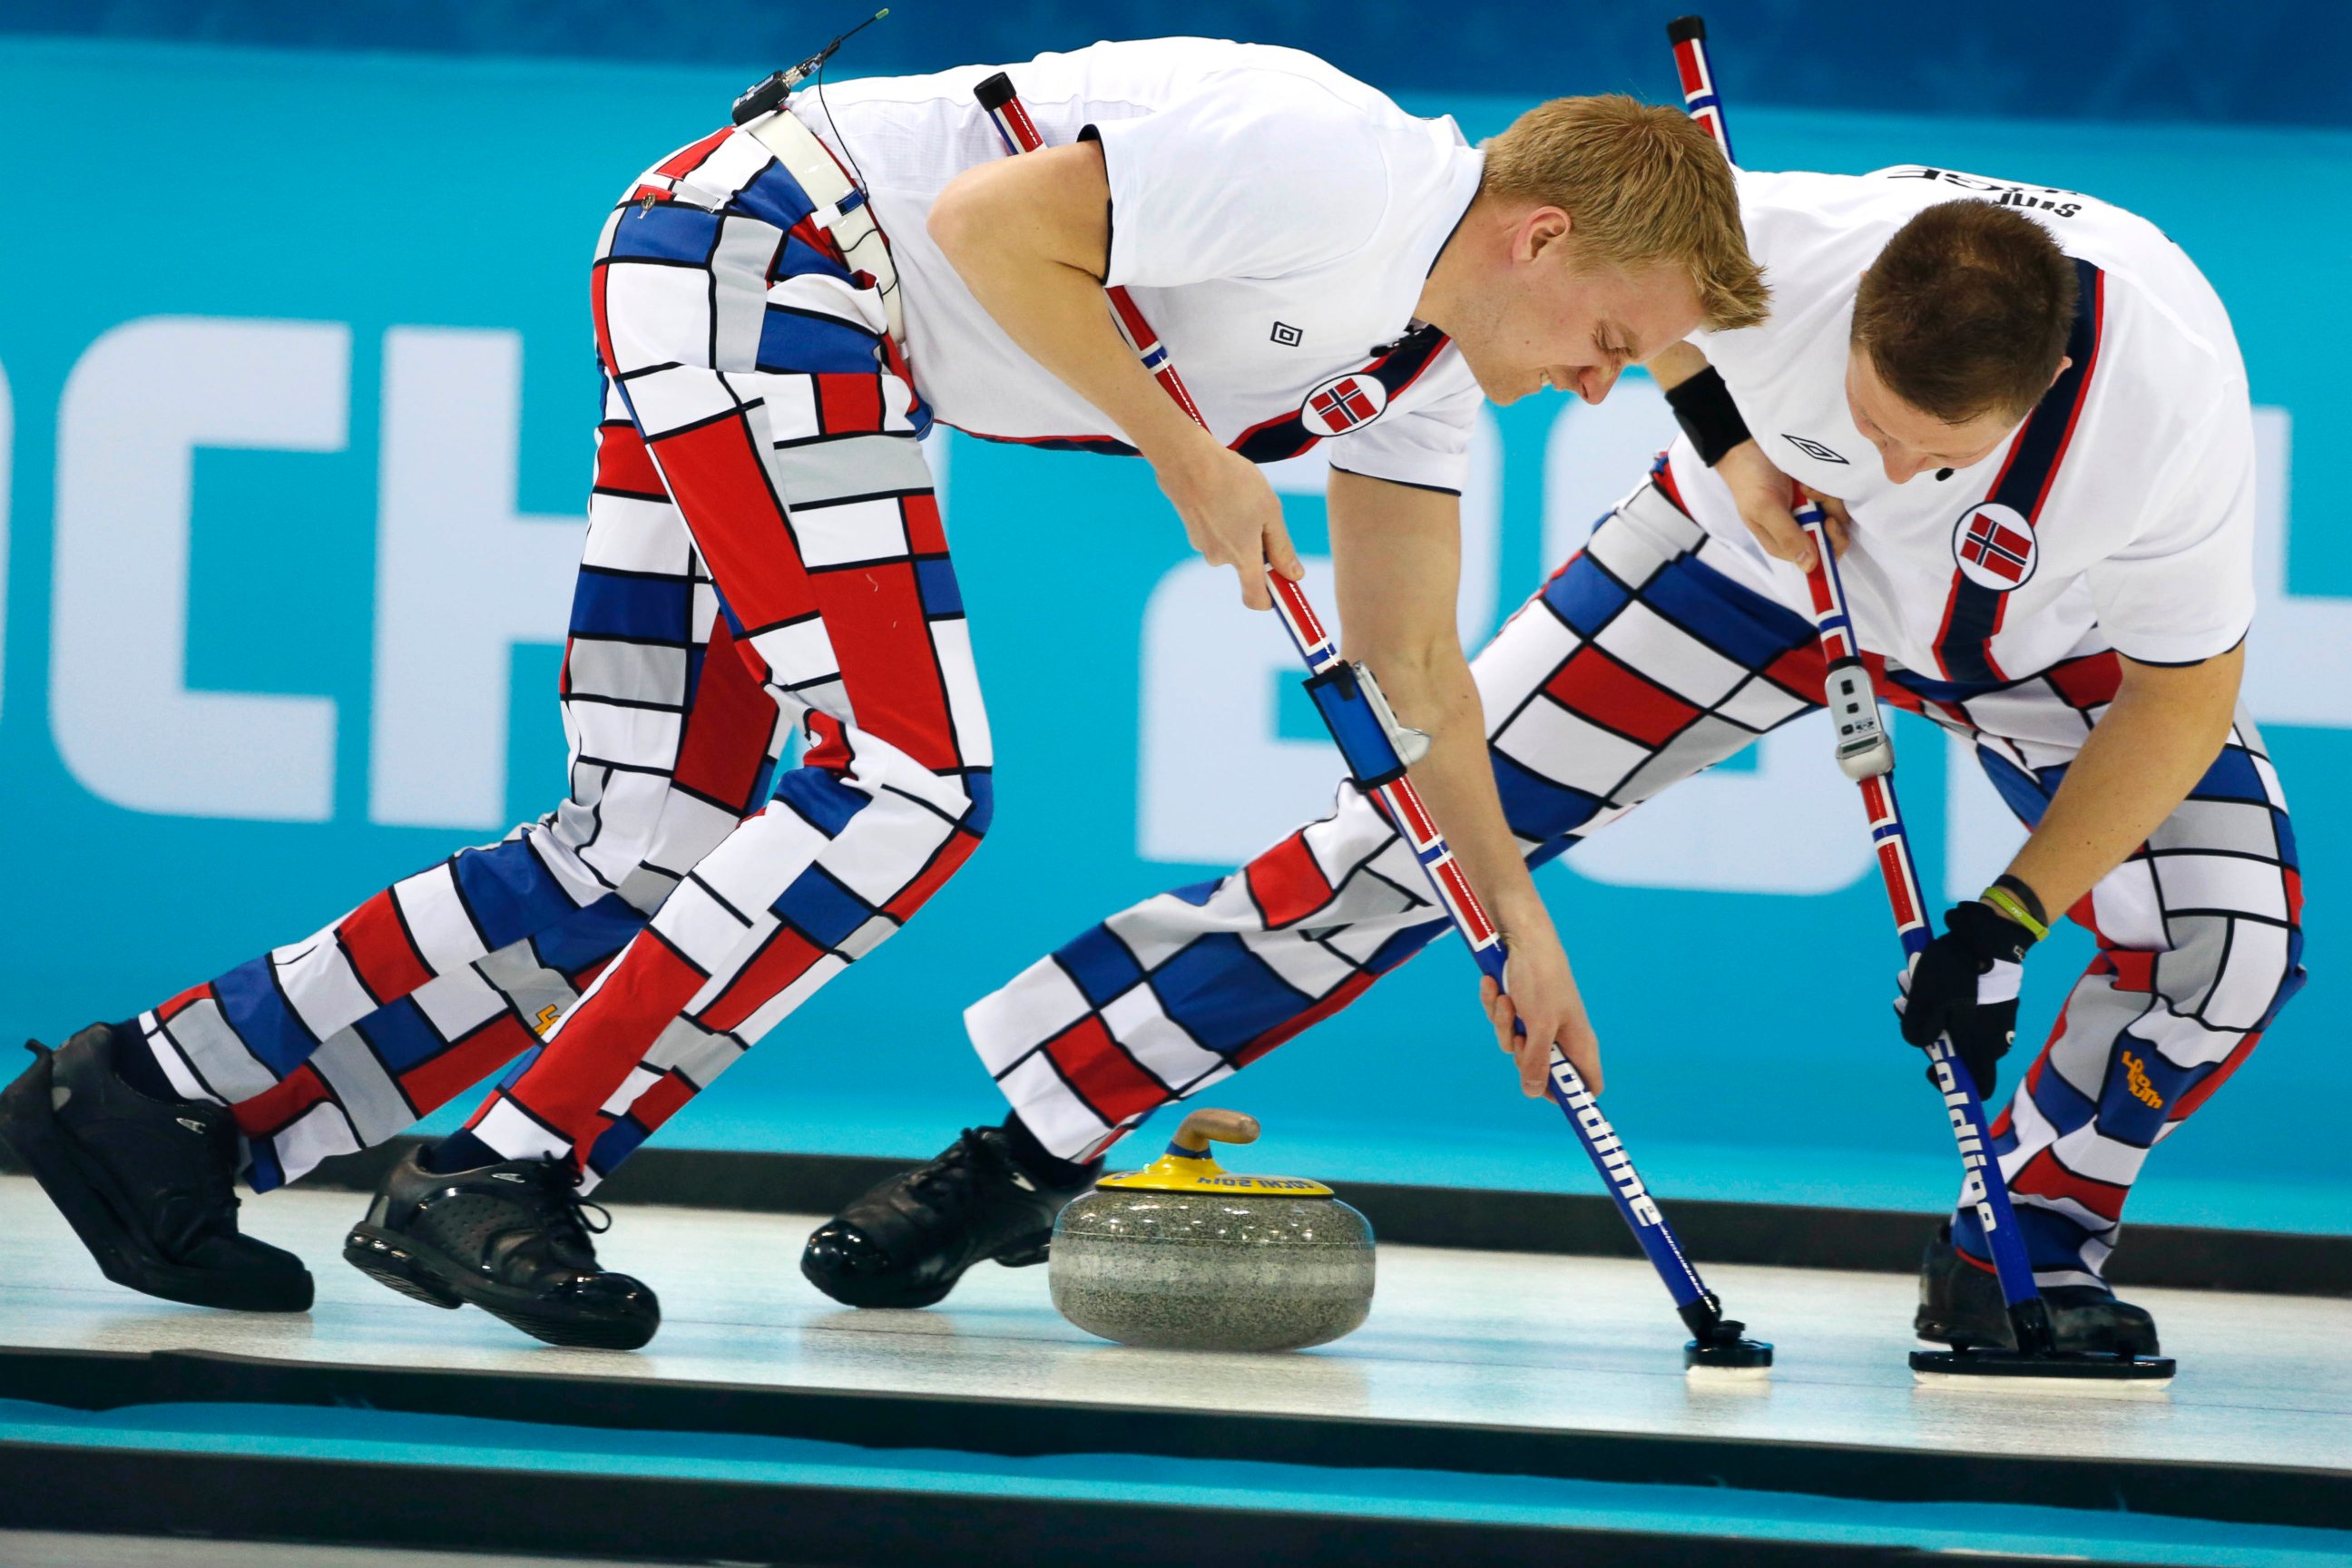 PHOTO: Norway's Haavard Vad Petersson, left, and Christoffer Svae sweep during men's curling competition against Team USA at the 2014 Winter Olympics, Feb. 10, 2014, in Sochi, Russia.